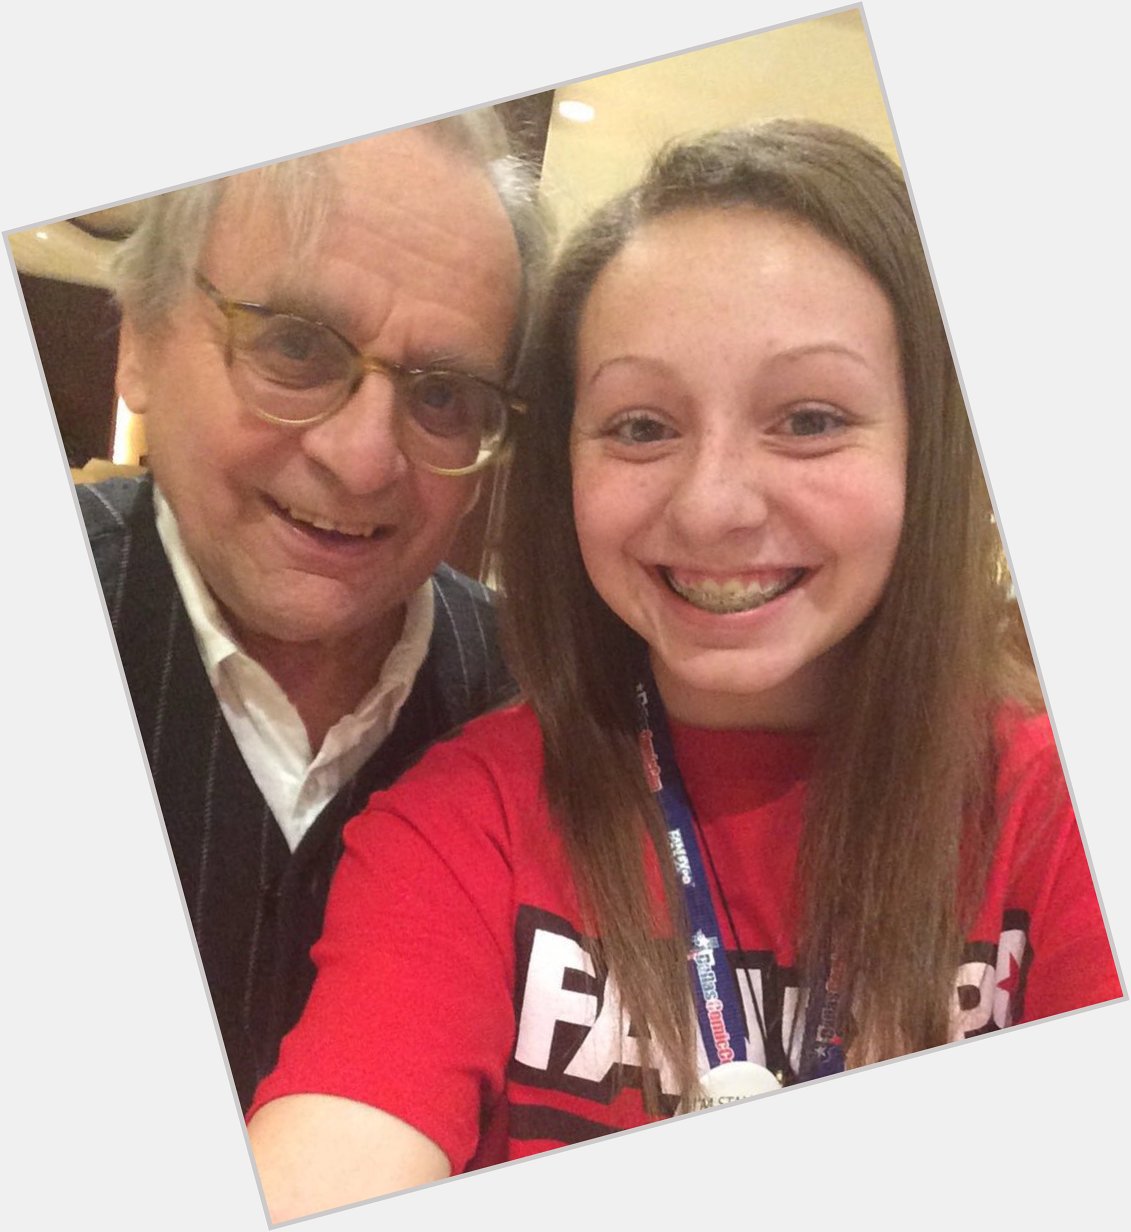 Throwback to when I randomly ran into Sylvester McCoy at the hotel I was staying at.  Happy Birthday Sylvester! 